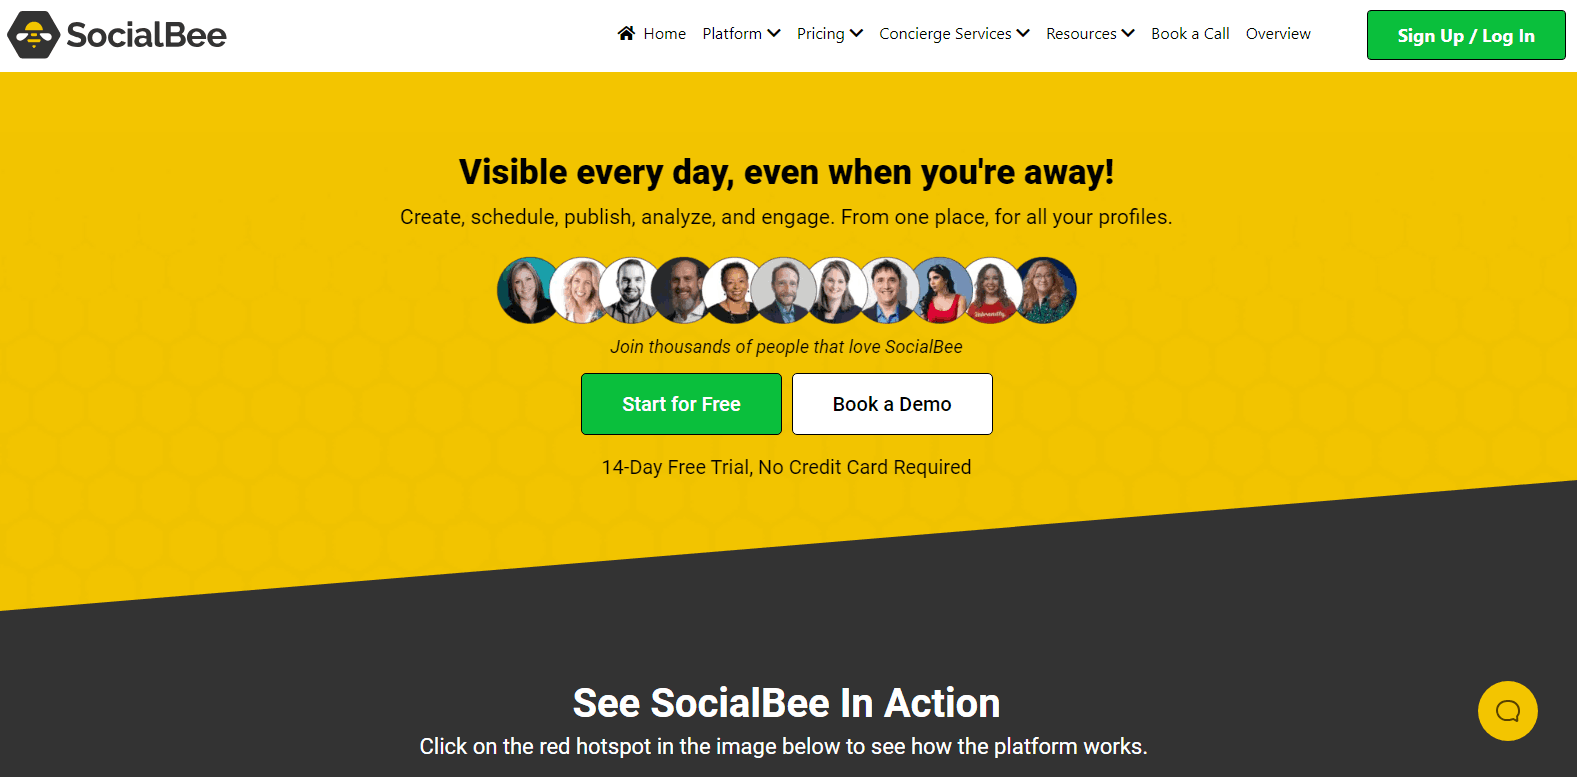 SocialBee Homepage: Visible every day, even when you're away!